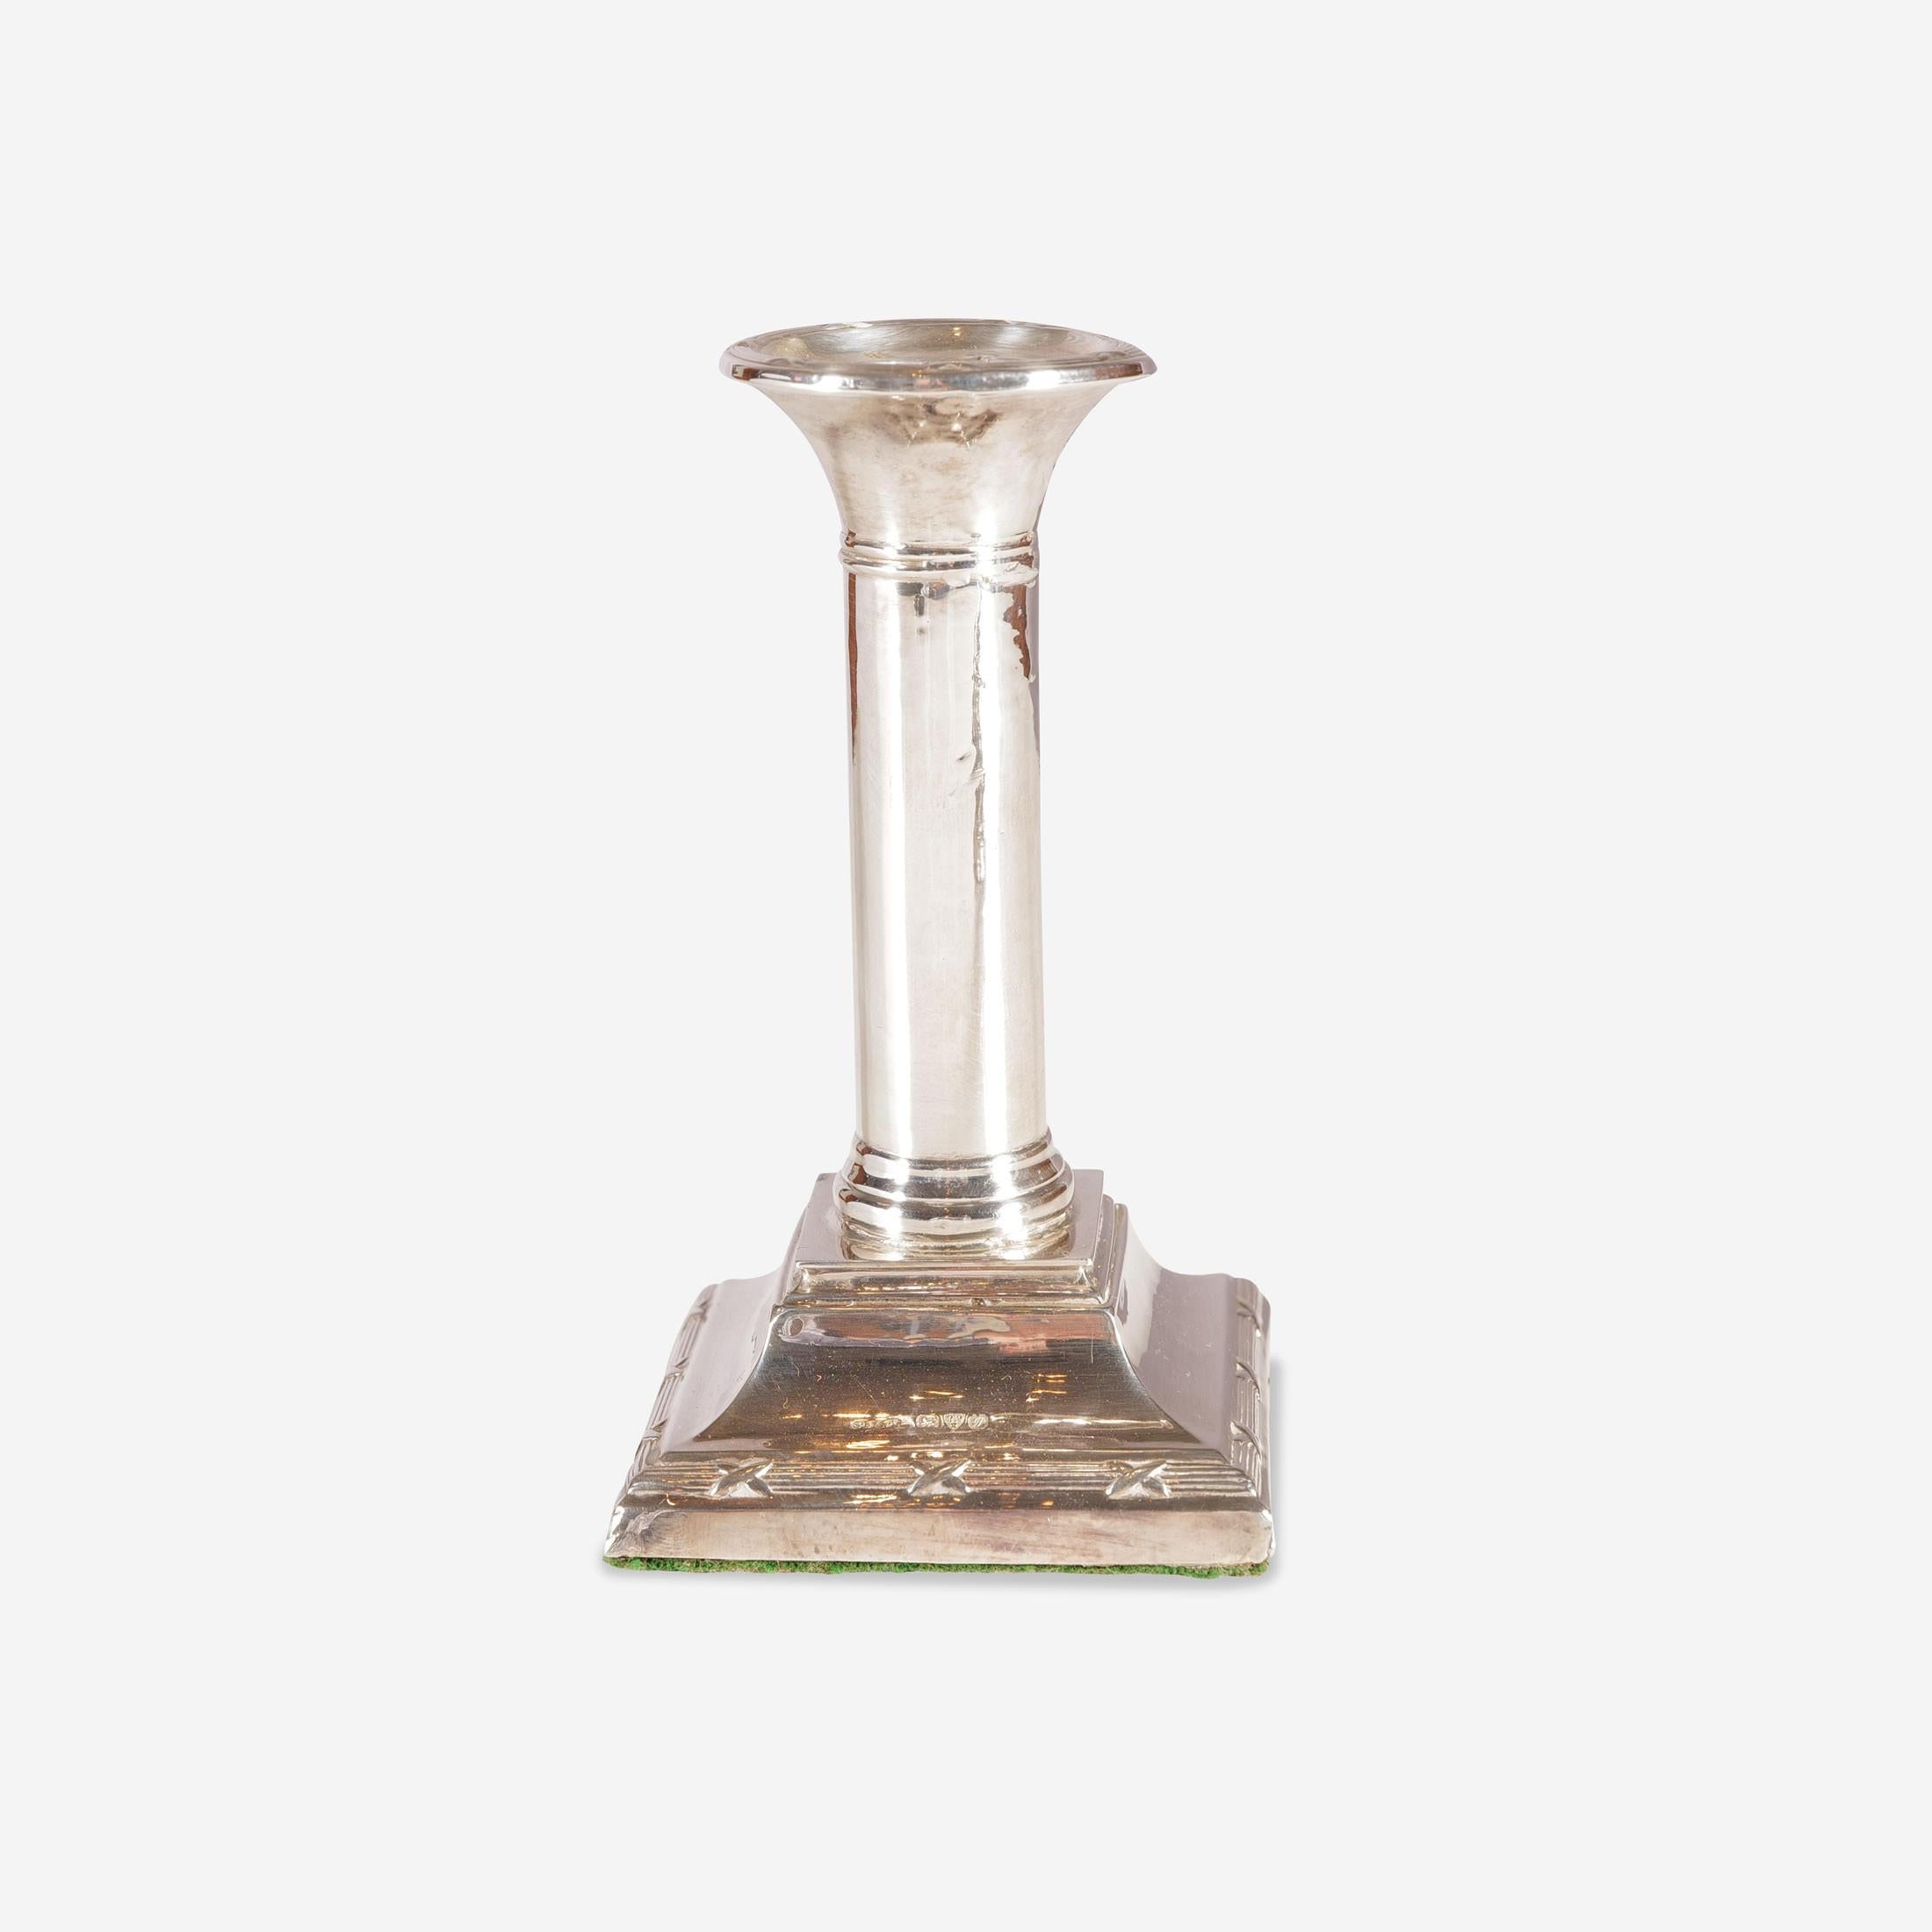 Pair of candlesticks, silver 925/-, Birmingham 1915, square base with cross-band decoration

Height 13 cm, diameter base 7.5 x 7.5 cm